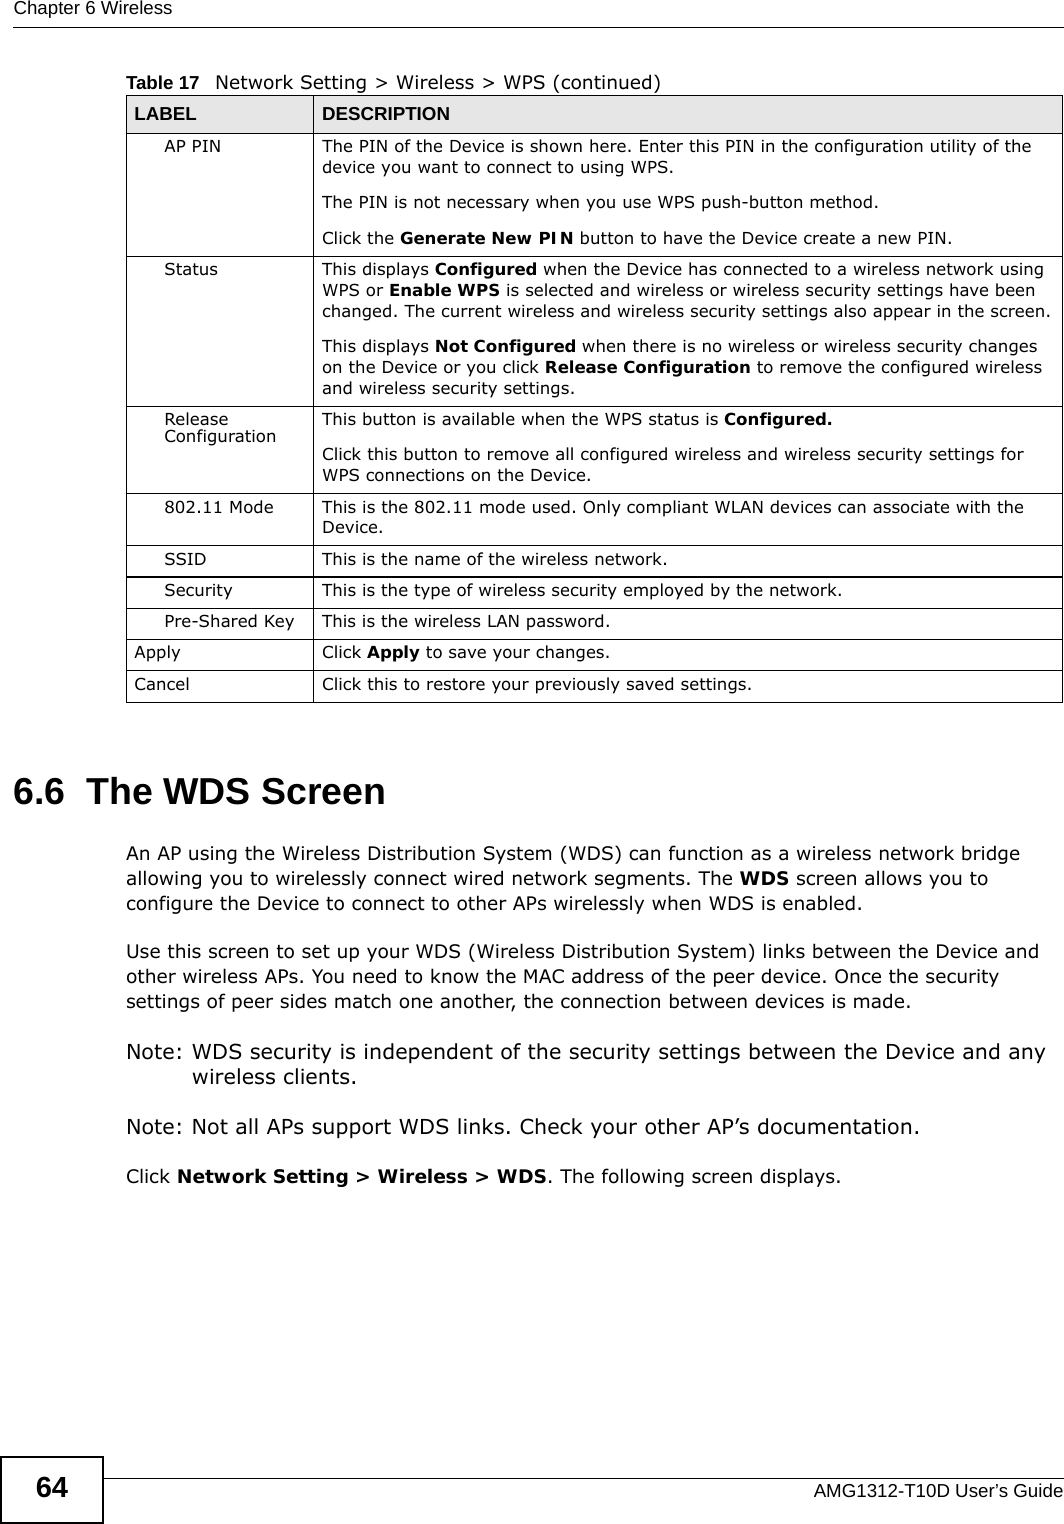 Chapter 6 WirelessAMG1312-T10D User’s Guide646.6  The WDS ScreenAn AP using the Wireless Distribution System (WDS) can function as a wireless network bridge allowing you to wirelessly connect wired network segments. The WDS screen allows you to configure the Device to connect to other APs wirelessly when WDS is enabled. Use this screen to set up your WDS (Wireless Distribution System) links between the Device and other wireless APs. You need to know the MAC address of the peer device. Once the security settings of peer sides match one another, the connection between devices is made. Note: WDS security is independent of the security settings between the Device and any wireless clients.Note: Not all APs support WDS links. Check your other AP’s documentation.Click Network Setting &gt; Wireless &gt; WDS. The following screen displays.AP PIN The PIN of the Device is shown here. Enter this PIN in the configuration utility of the device you want to connect to using WPS.The PIN is not necessary when you use WPS push-button method.Click the Generate New PIN button to have the Device create a new PIN.Status This displays Configured when the Device has connected to a wireless network using WPS or Enable WPS is selected and wireless or wireless security settings have been changed. The current wireless and wireless security settings also appear in the screen.This displays Not Configured when there is no wireless or wireless security changes on the Device or you click Release Configuration to remove the configured wireless and wireless security settings.Release Configuration This button is available when the WPS status is Configured.Click this button to remove all configured wireless and wireless security settings for WPS connections on the Device.802.11 Mode This is the 802.11 mode used. Only compliant WLAN devices can associate with the Device.SSID This is the name of the wireless network.Security This is the type of wireless security employed by the network.Pre-Shared Key This is the wireless LAN password. Apply Click Apply to save your changes.Cancel Click this to restore your previously saved settings.Table 17   Network Setting &gt; Wireless &gt; WPS (continued)LABEL DESCRIPTION